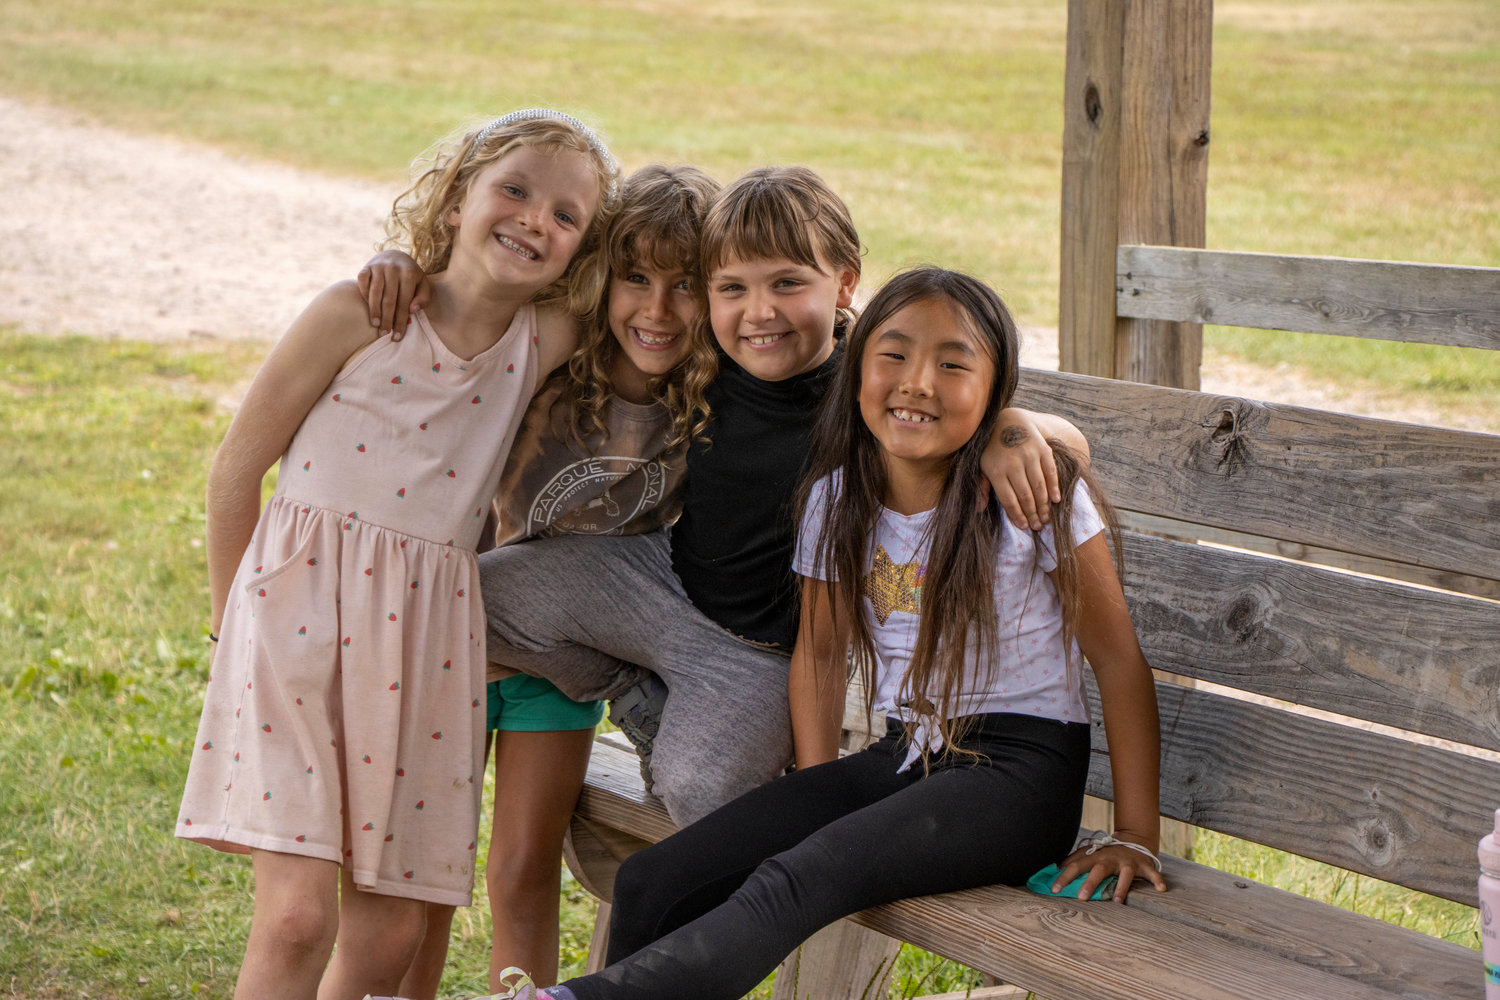 Frost Valley YMCA’s Expanded Financial Assistance allows more children to experience Day Camp.